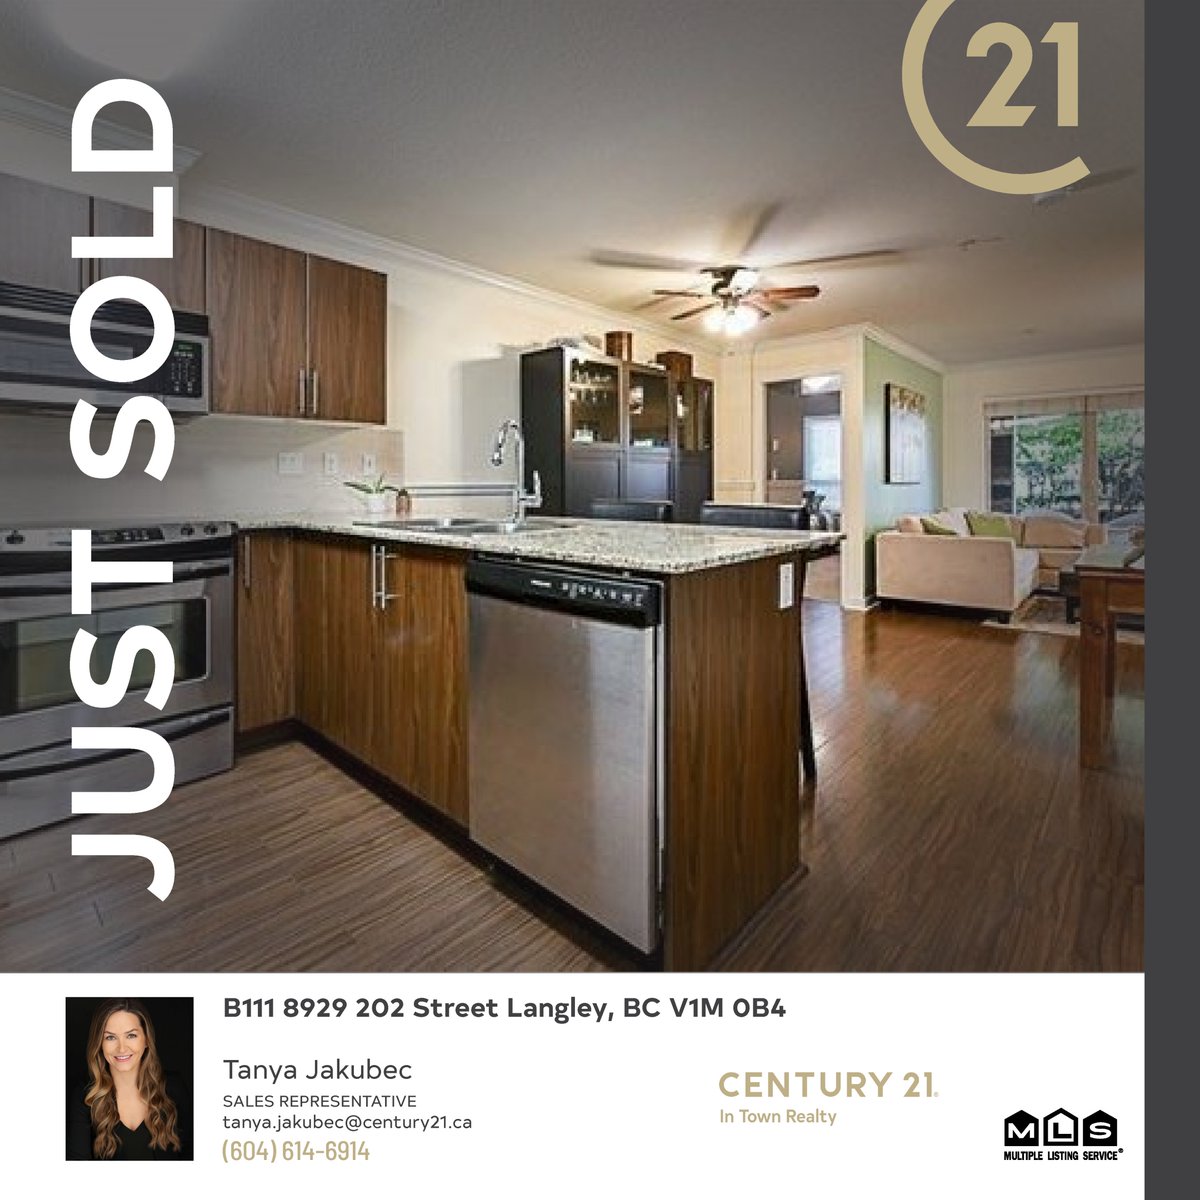 Congratulations to Tanya for successfully closing yet another deal! Your dedication and expertise continue to shine, making every transaction a success.

#Century21 #Century21intownrealty #century21vancouver #century21canada #Century21realestate #century21agent #century21realtor